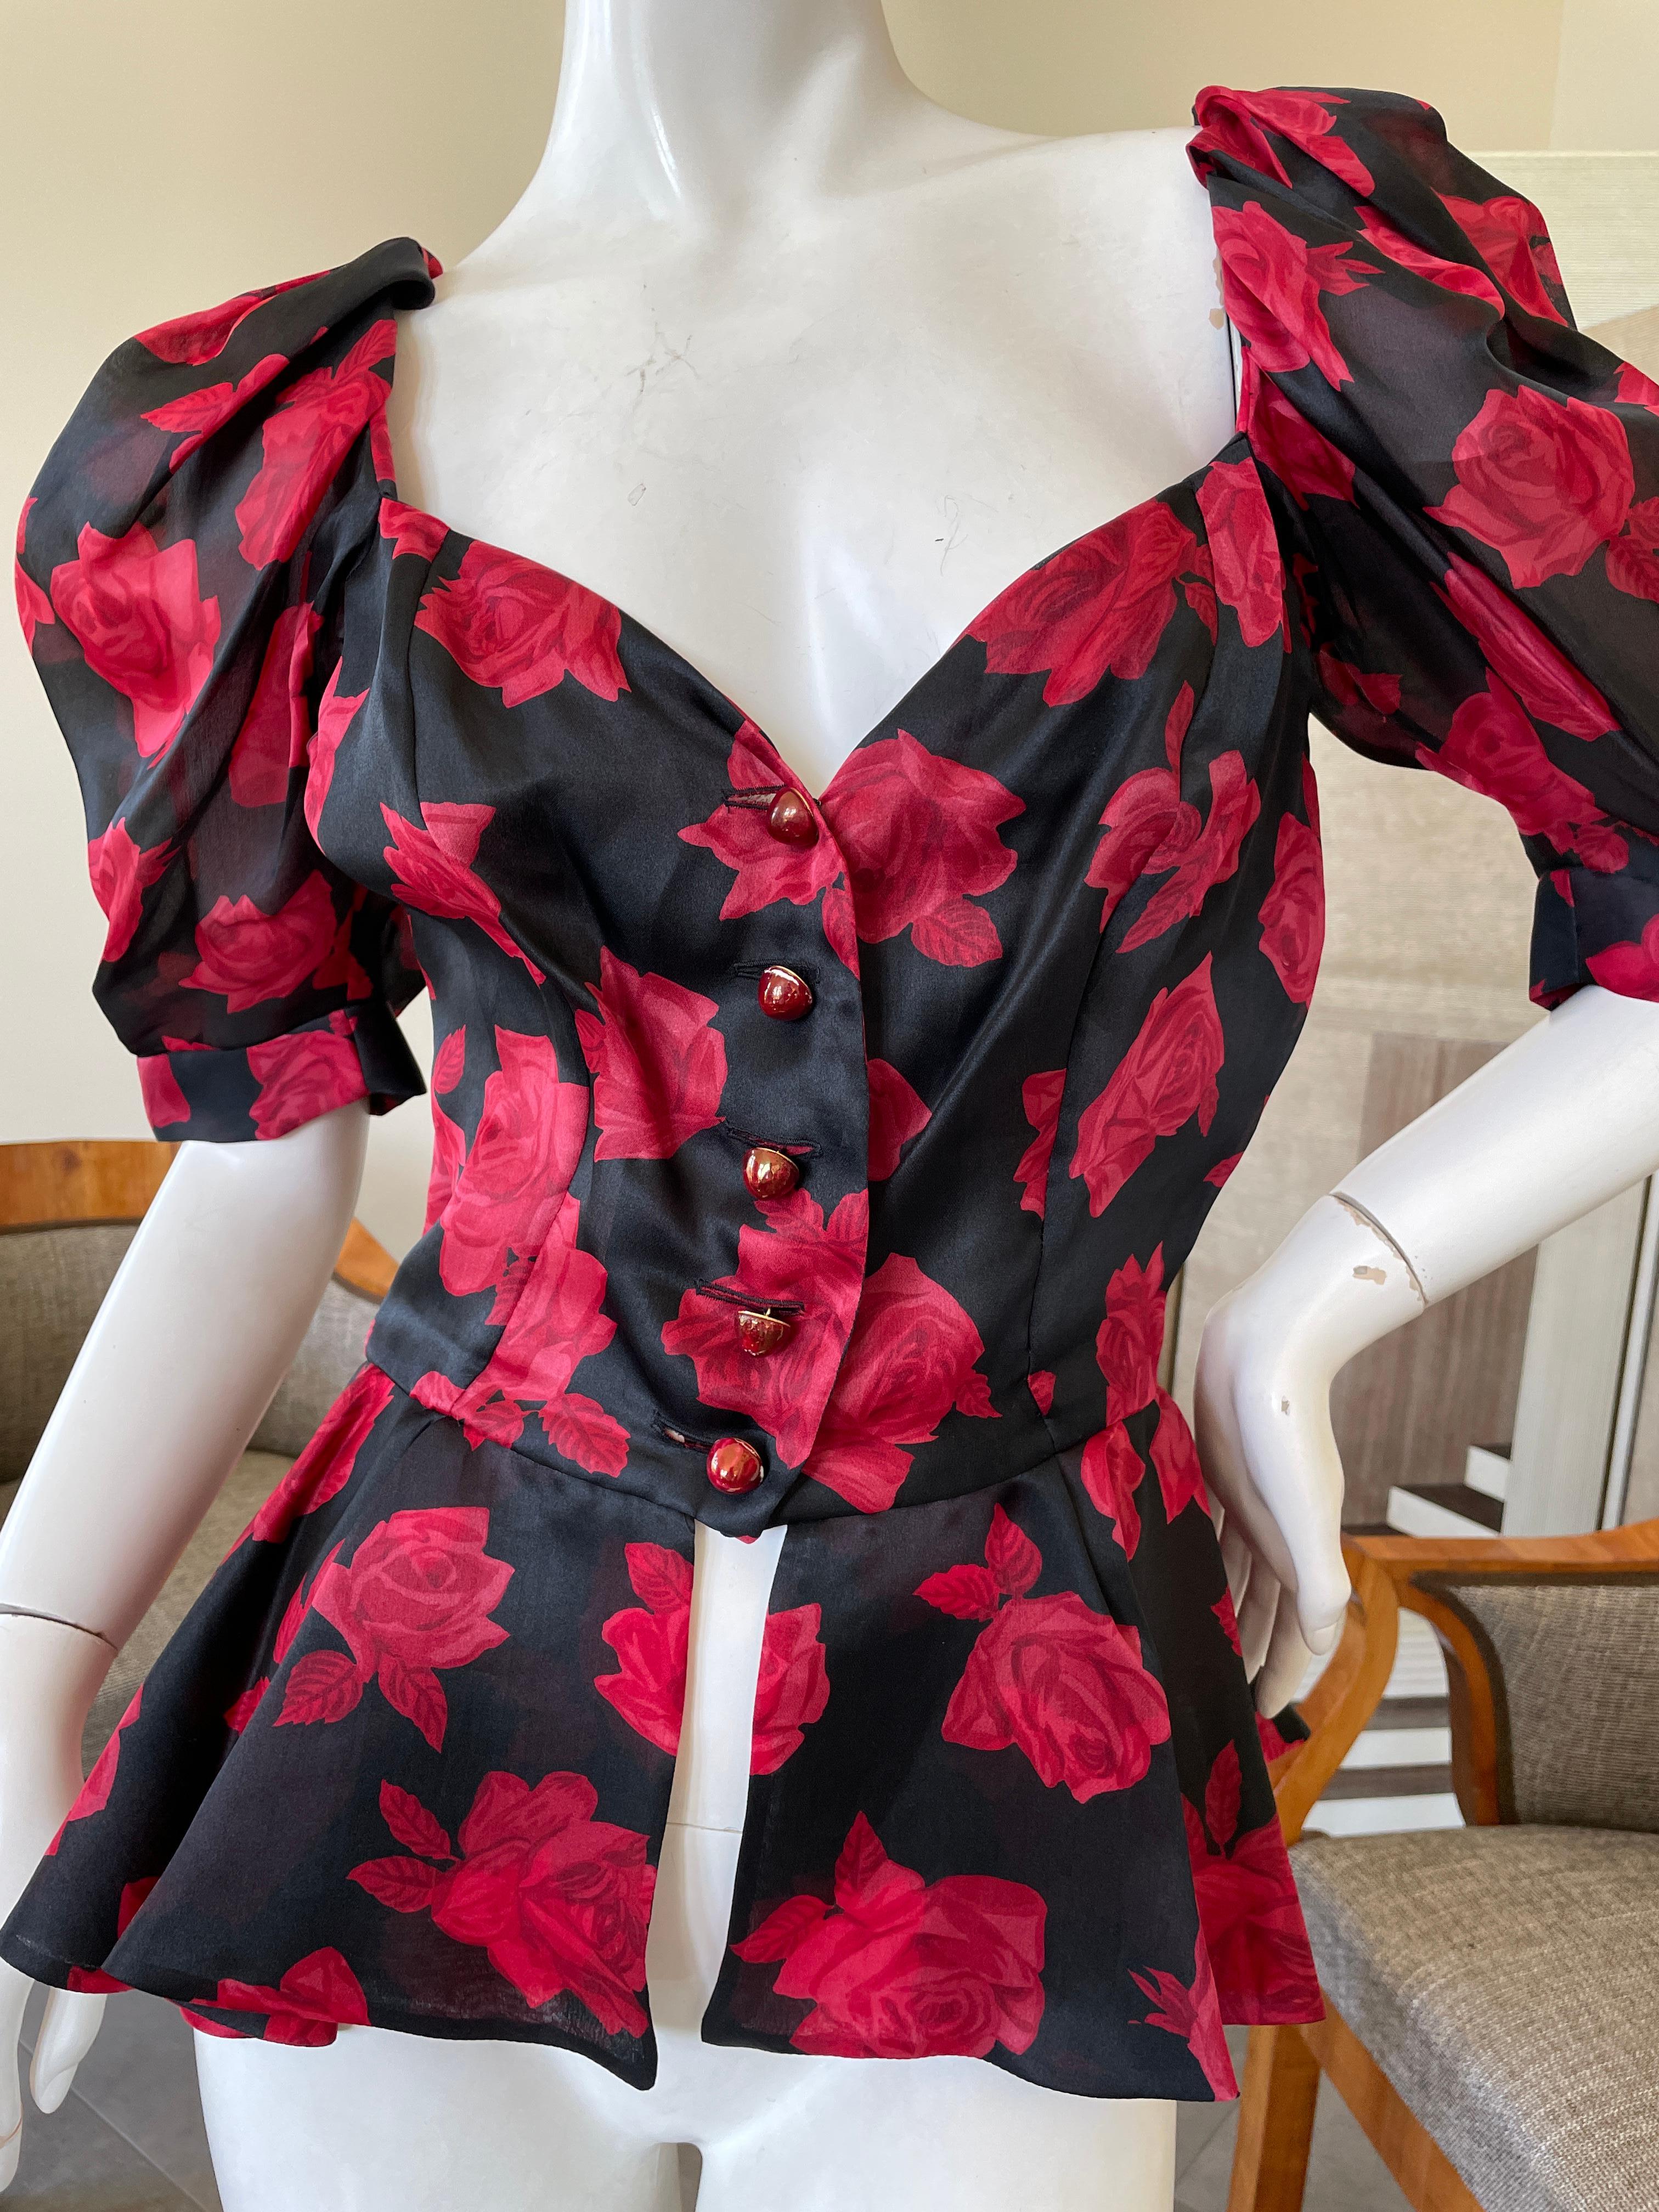 Yves Saint Laurent Rive Gauche 1970's Low Cut Floral Top In Excellent Condition For Sale In Cloverdale, CA